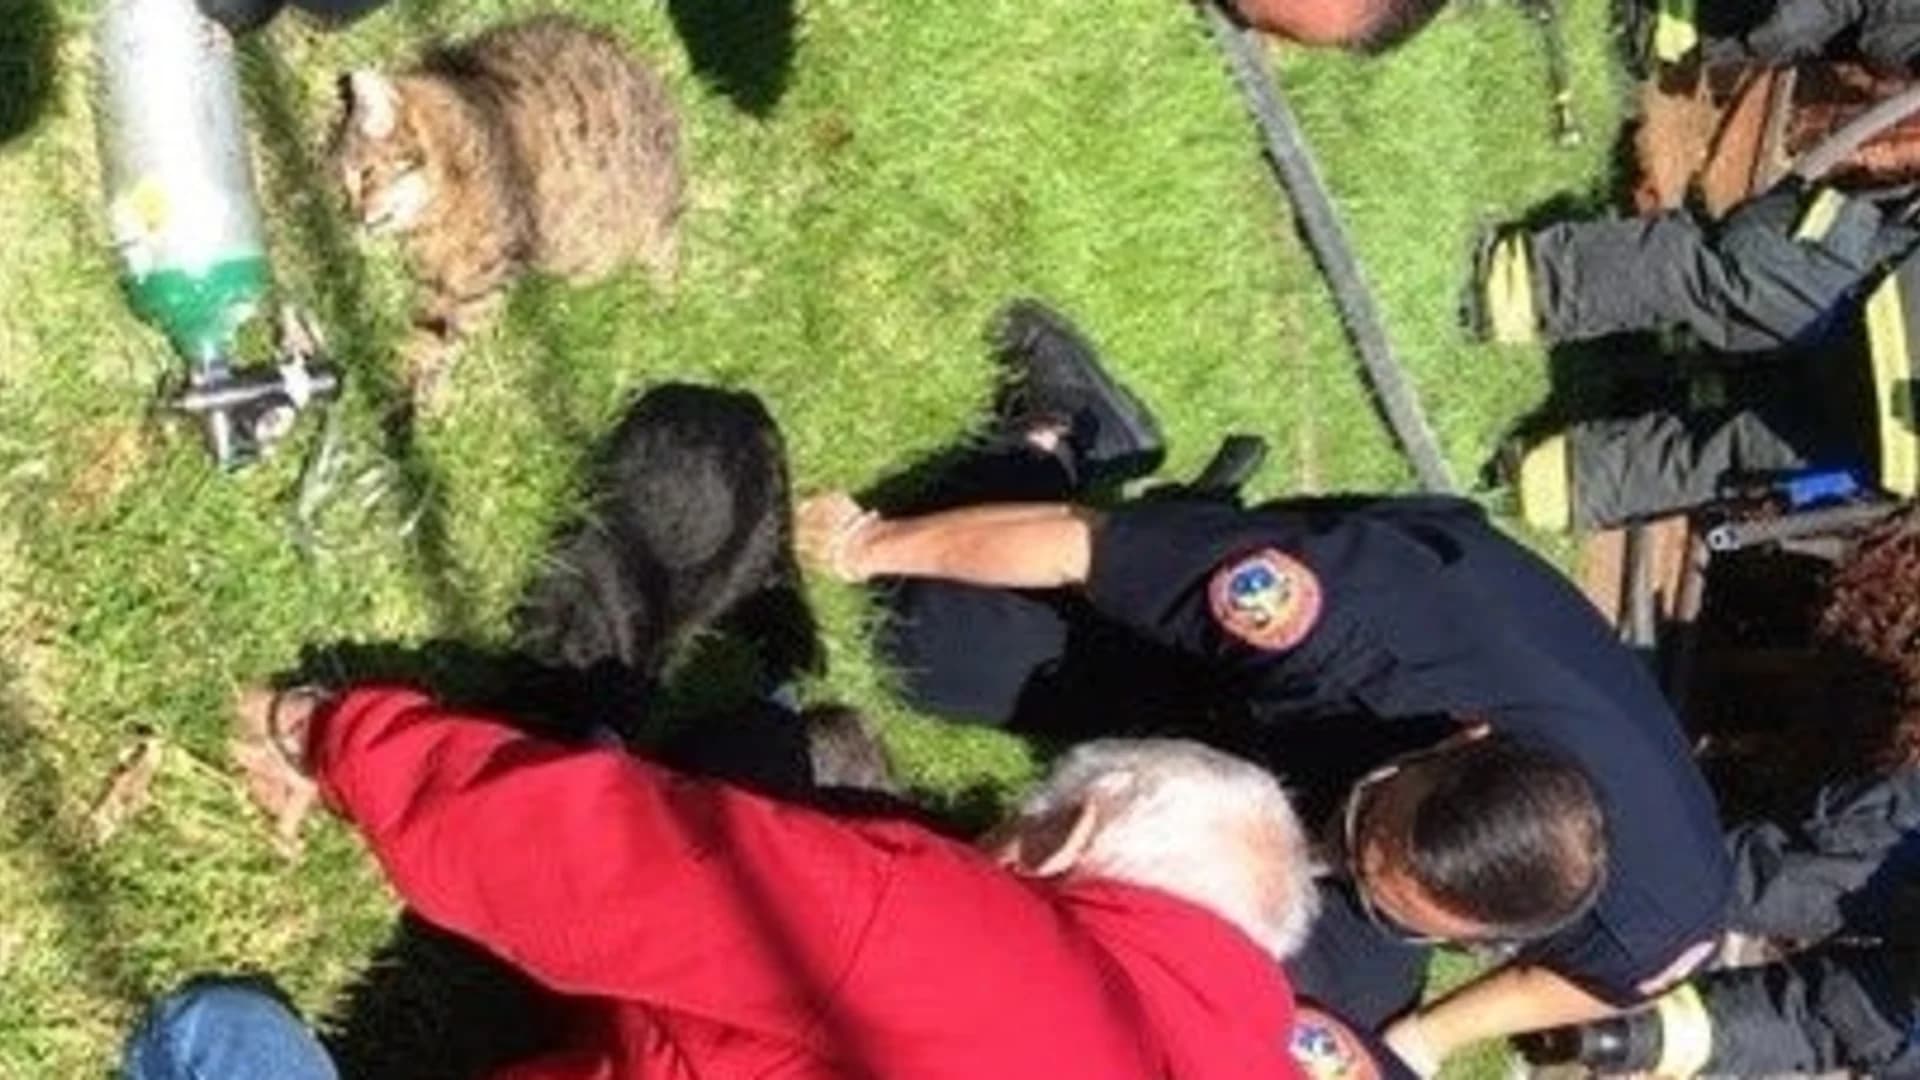 1st responders use CPR to revive cats trapped in house fire